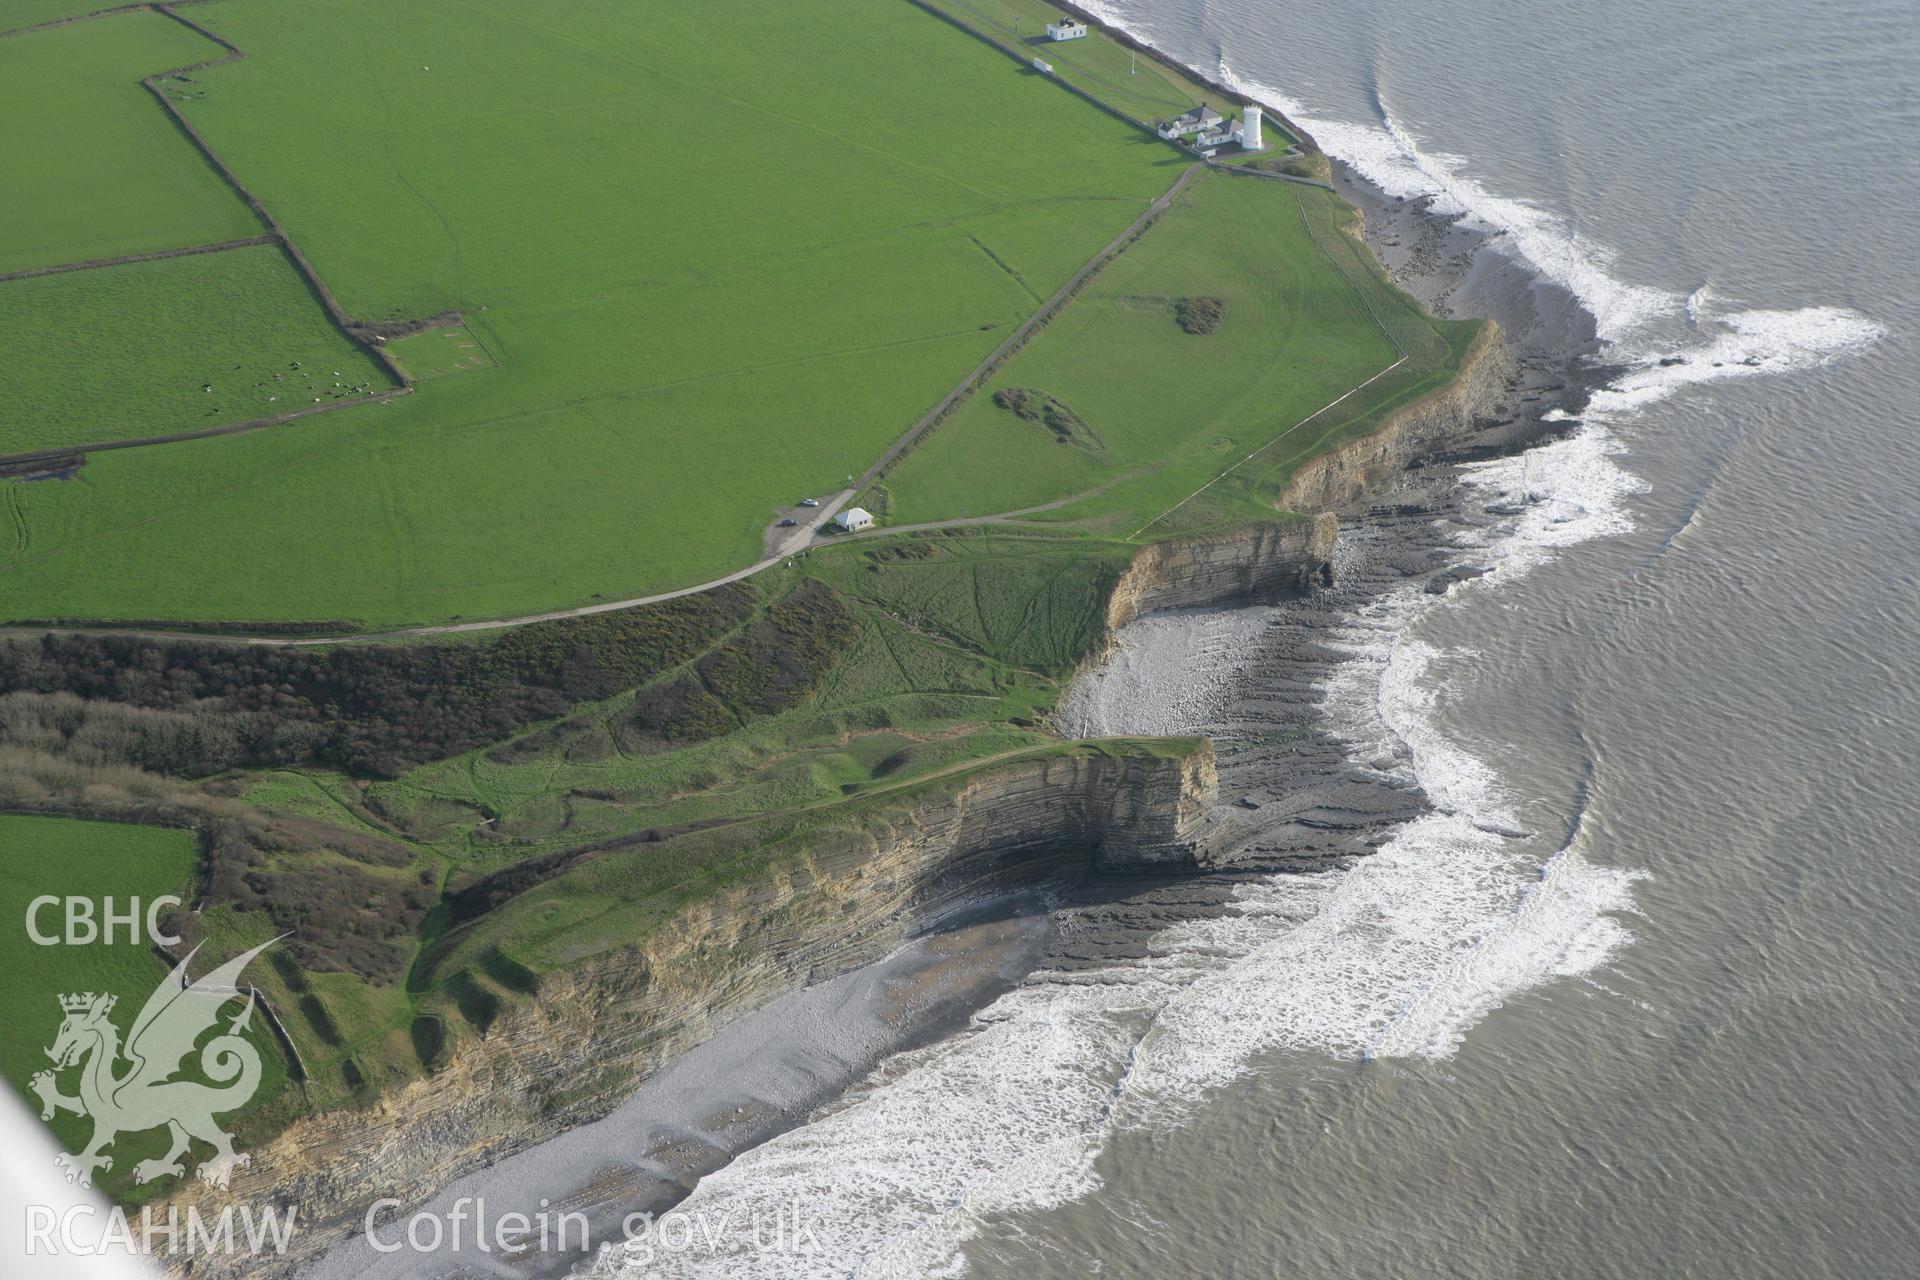 RCAHMW colour oblique photograph of Nash Point Promontory Fort. Taken by Toby Driver on 17/11/2011.